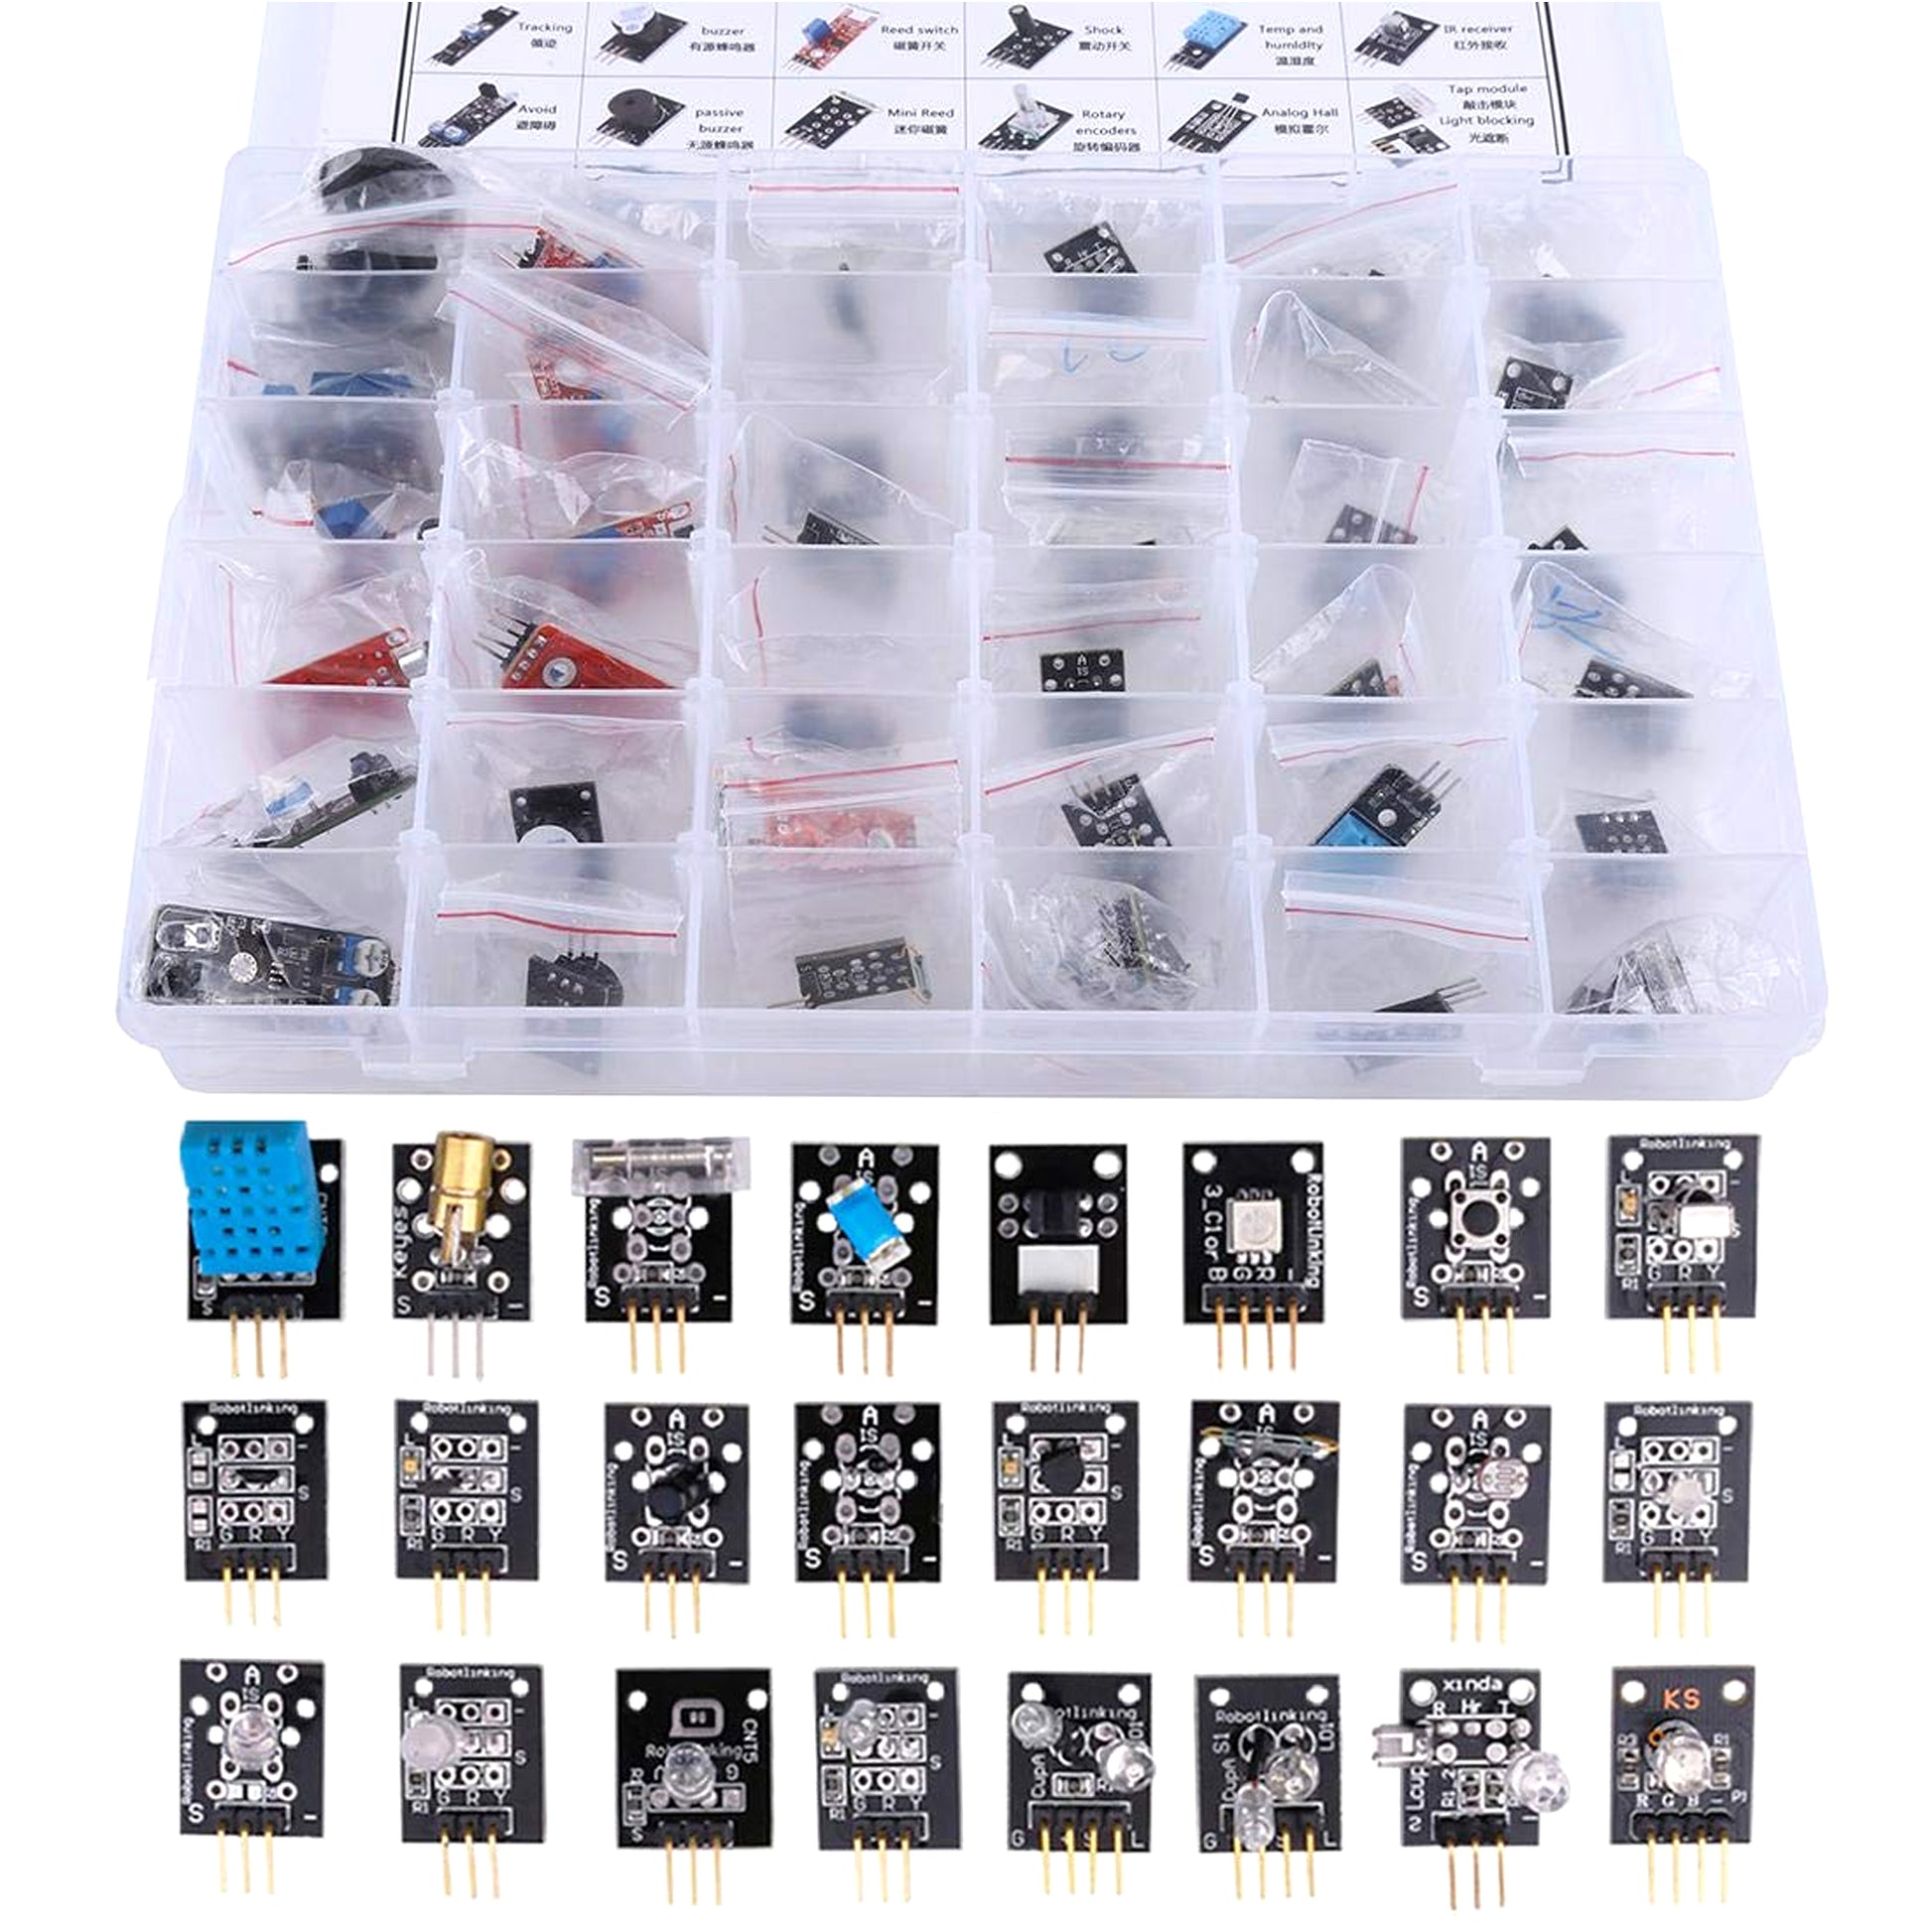 37 in 1 Sensor Kit Compatible with Arduino UNO, NodeMcu, Raspberry Pi, Robotics Projects - SR052 - REES52